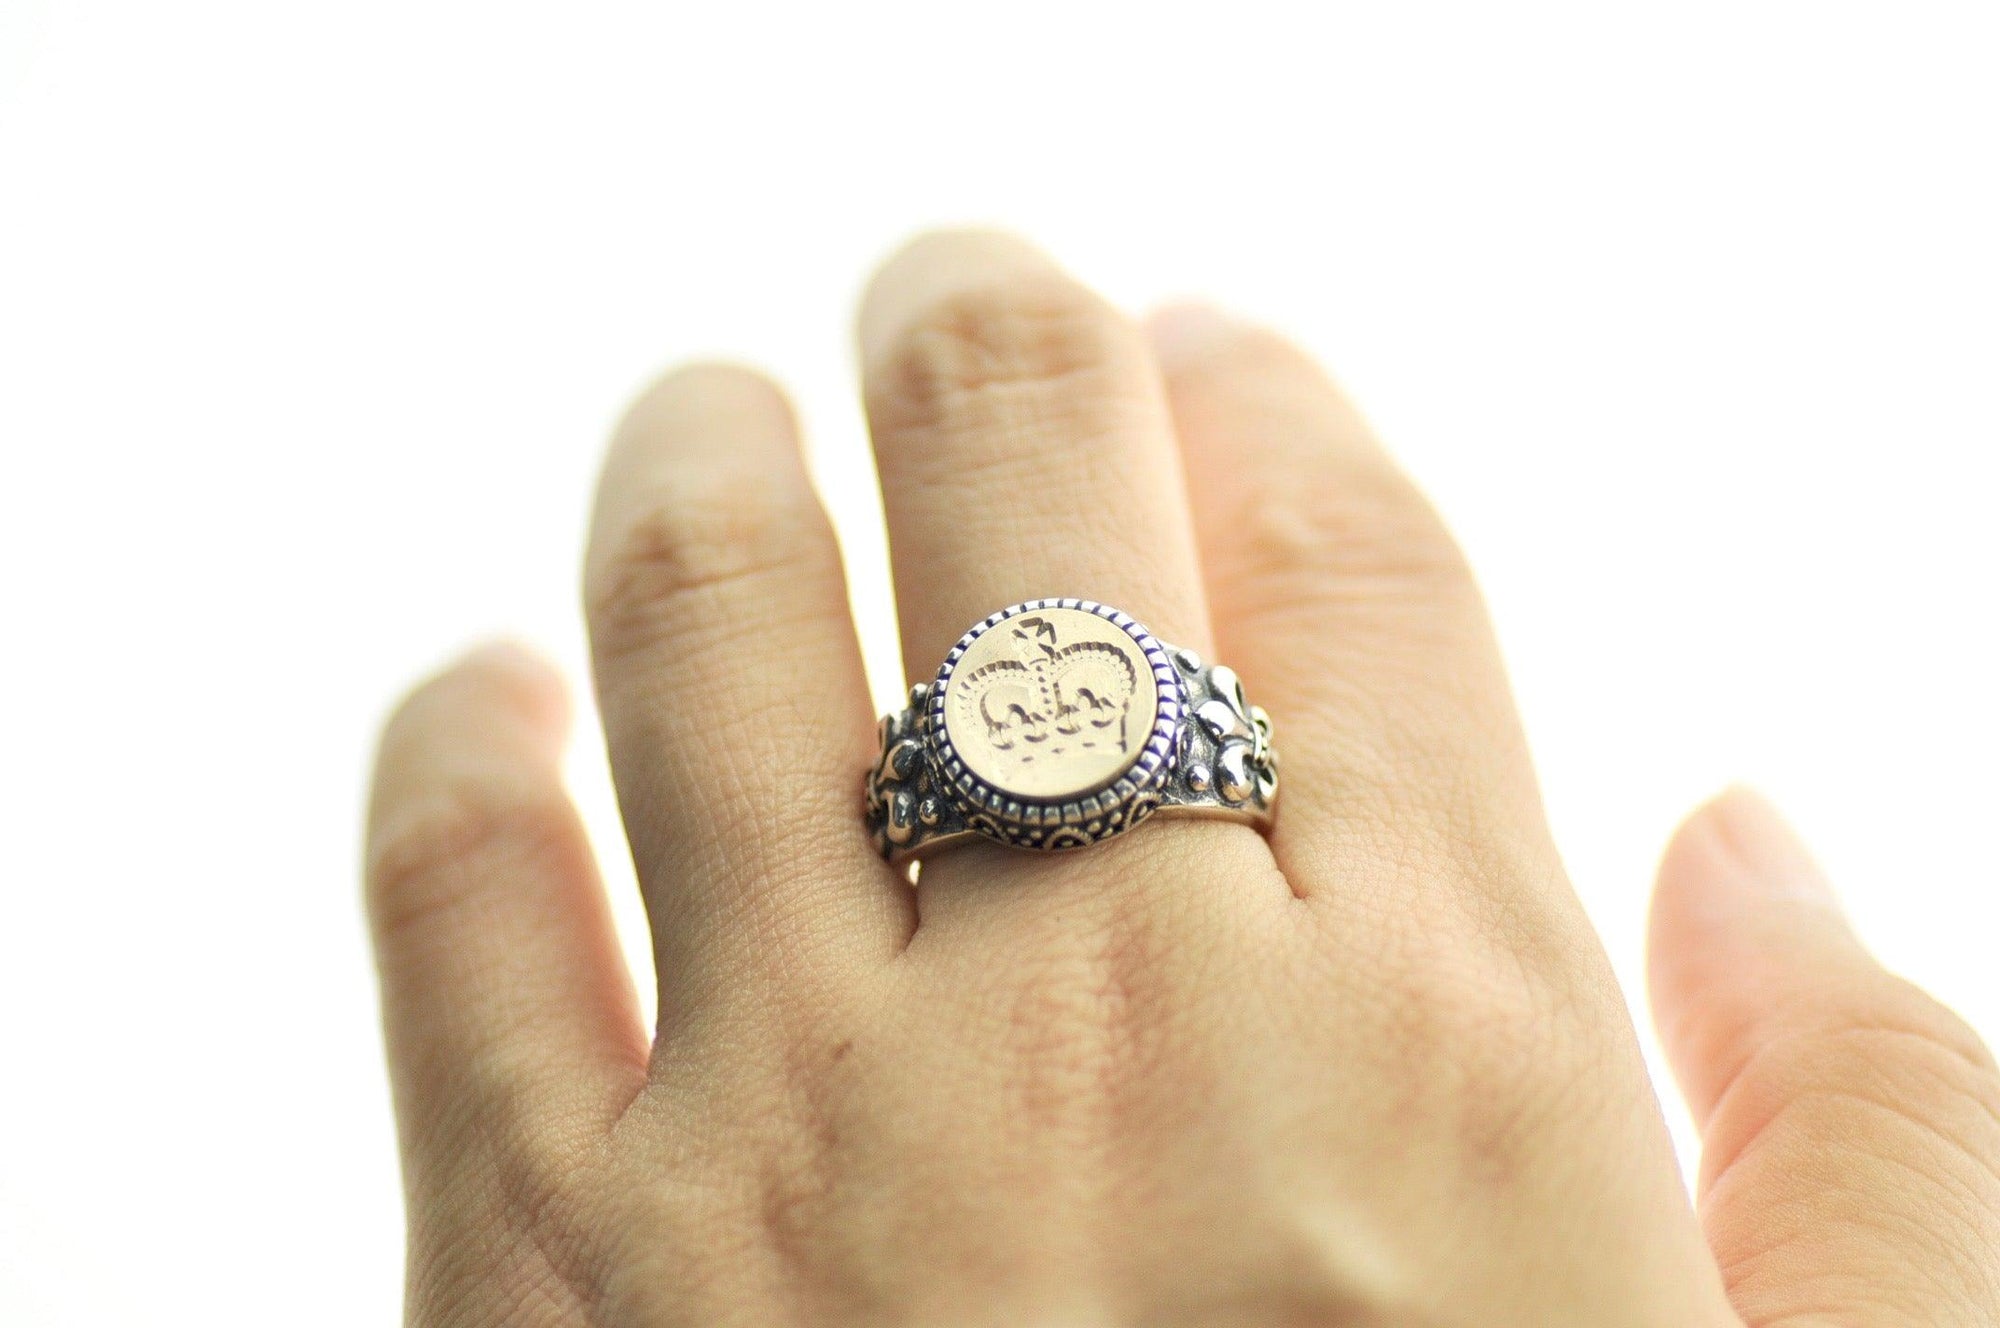 Royal Crown Signet Ring - Backtozero B20 - 12f, 12mm, 12mm ring, accessory, Crown, Fleur de Lis, him, jewelry, ring, Royal, signet ring, size 10, size 11, size 8, size 9, wax seal, wax seal ring, wax seal stamp